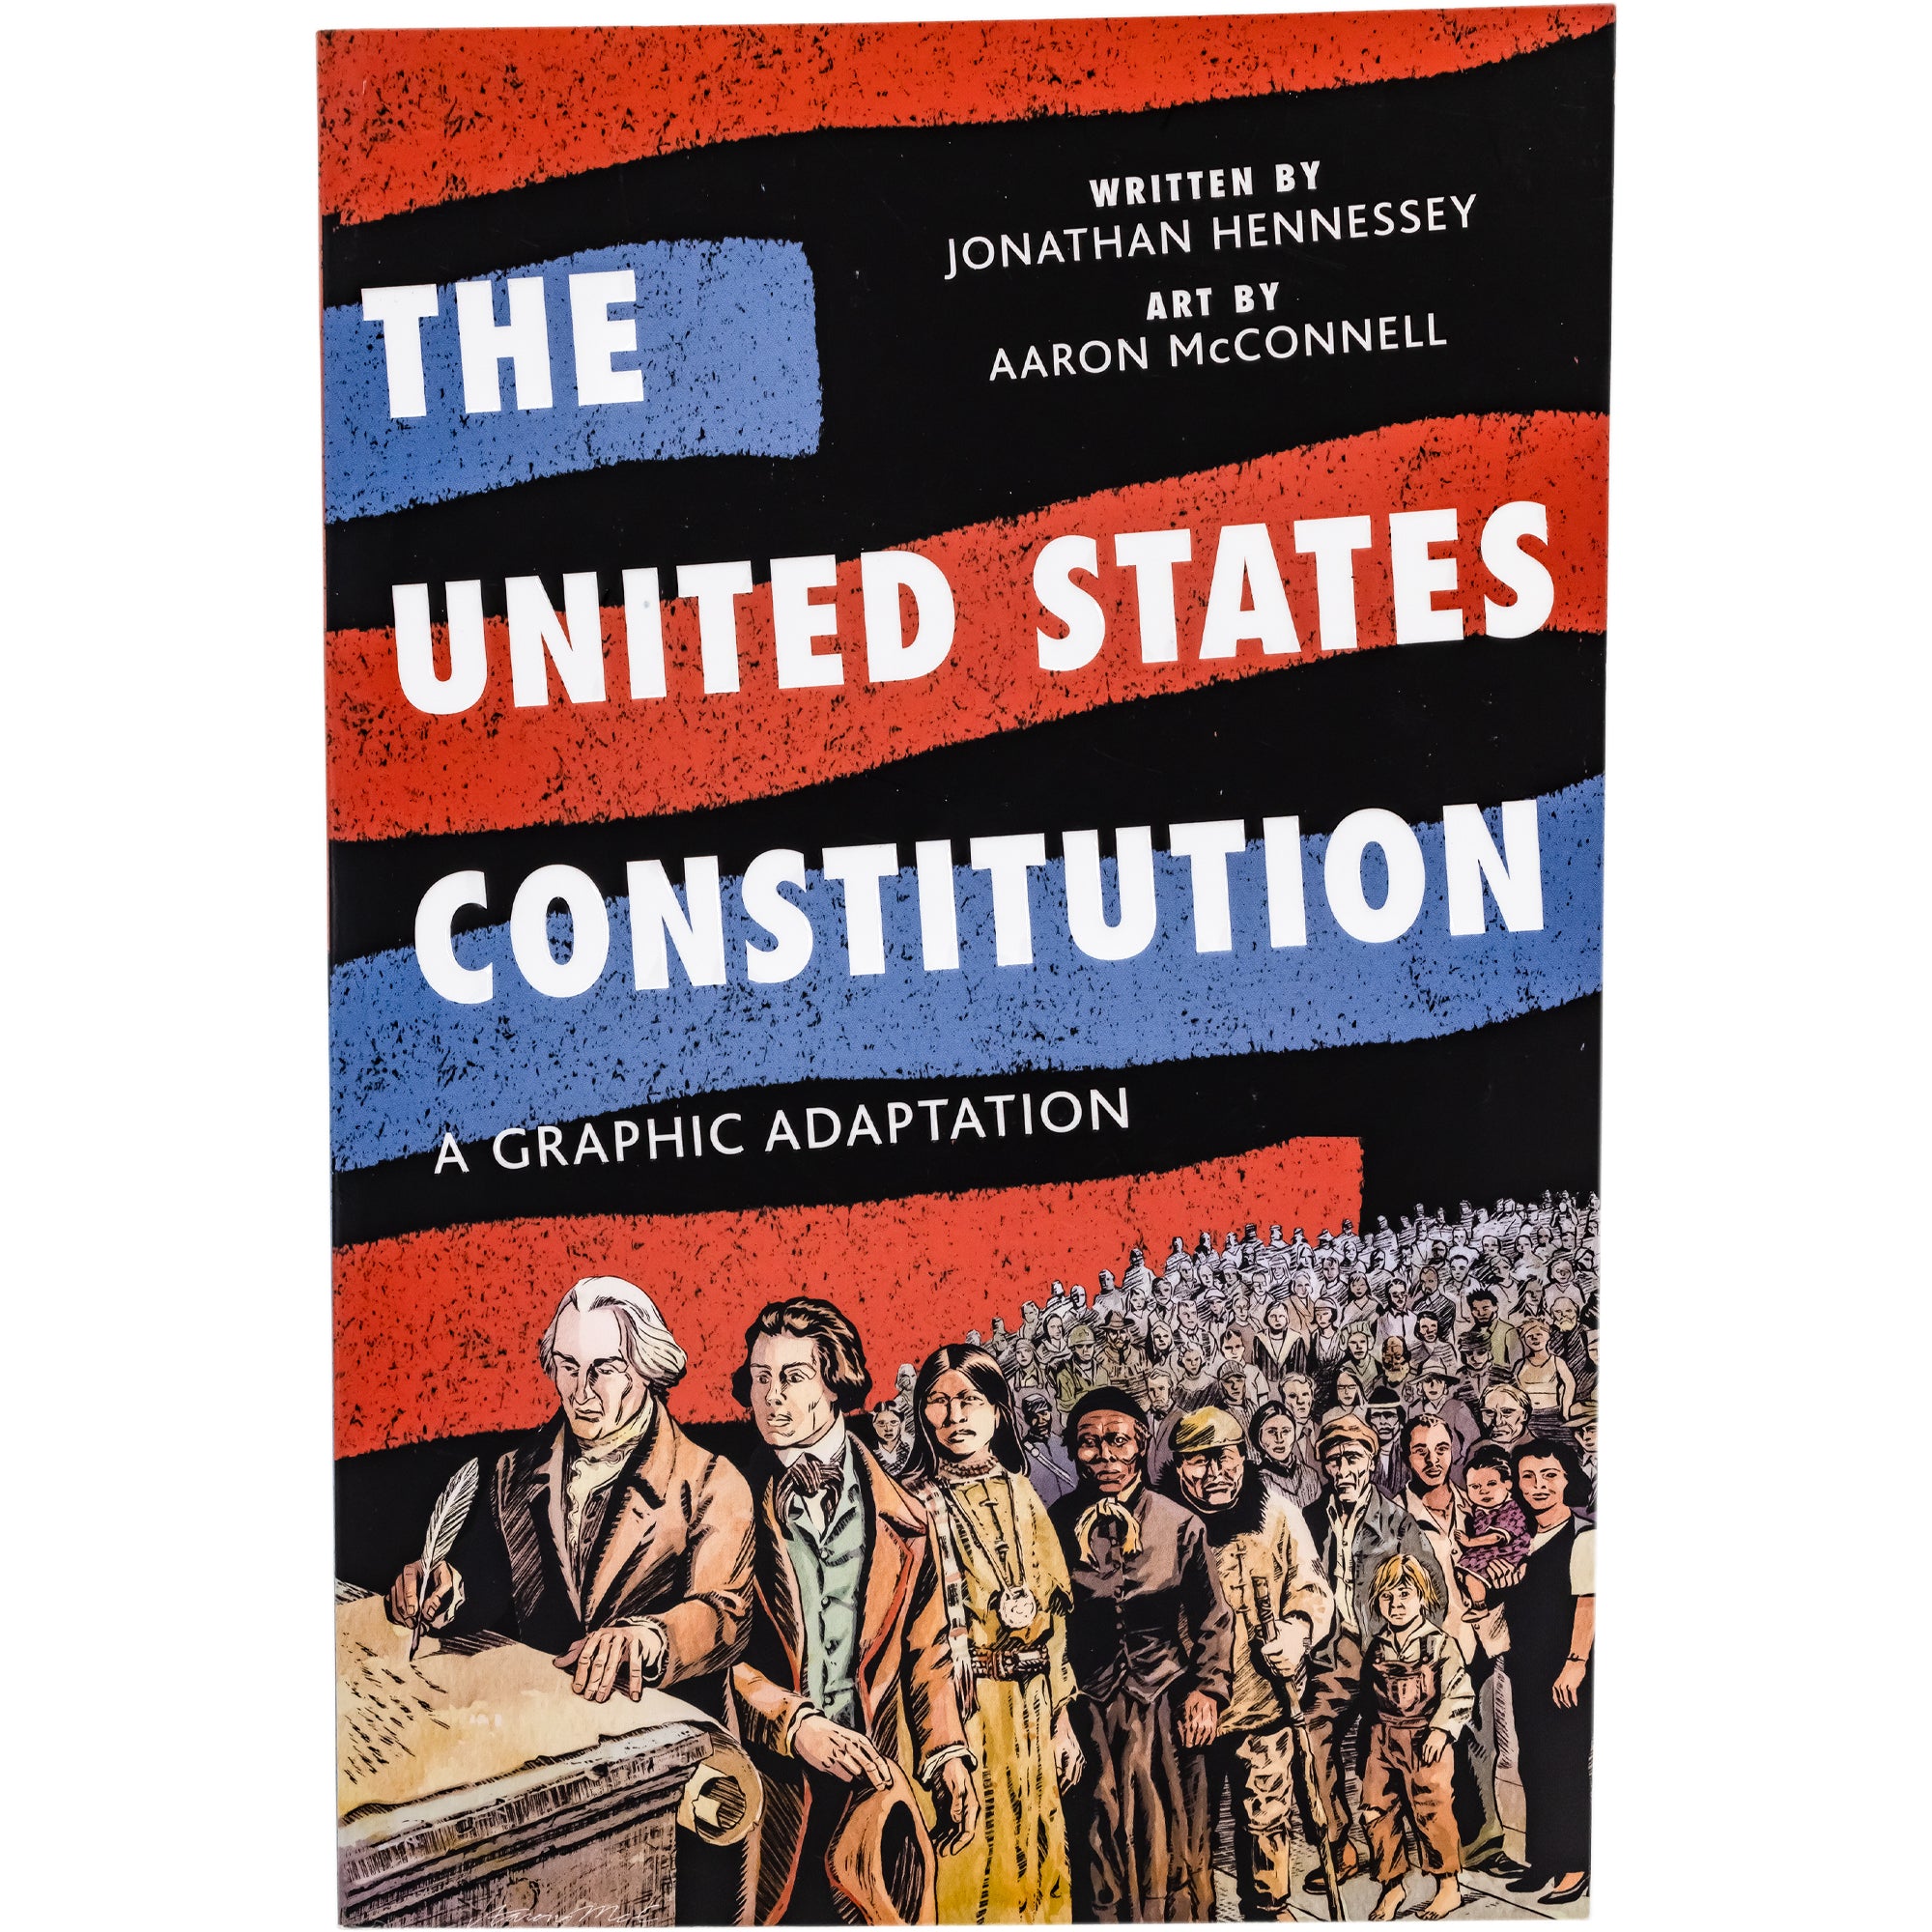 The United States Constitution with Quill & Ink Well – Shop-IHS